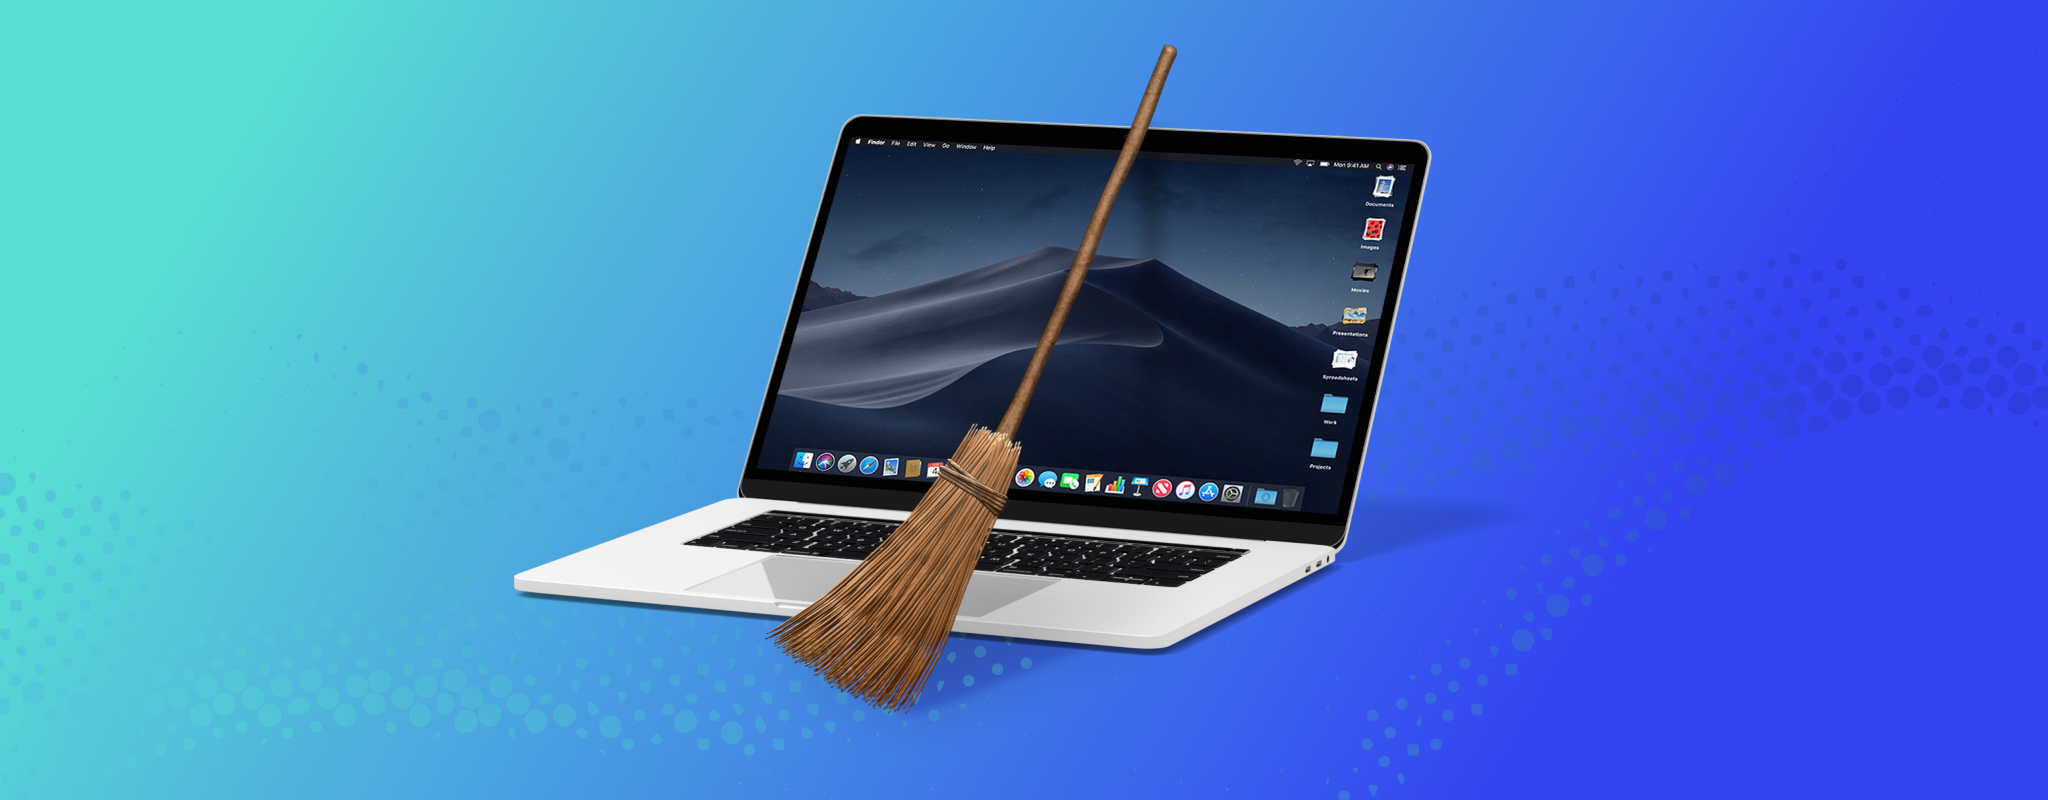 remove advanced mac cleaner from imac